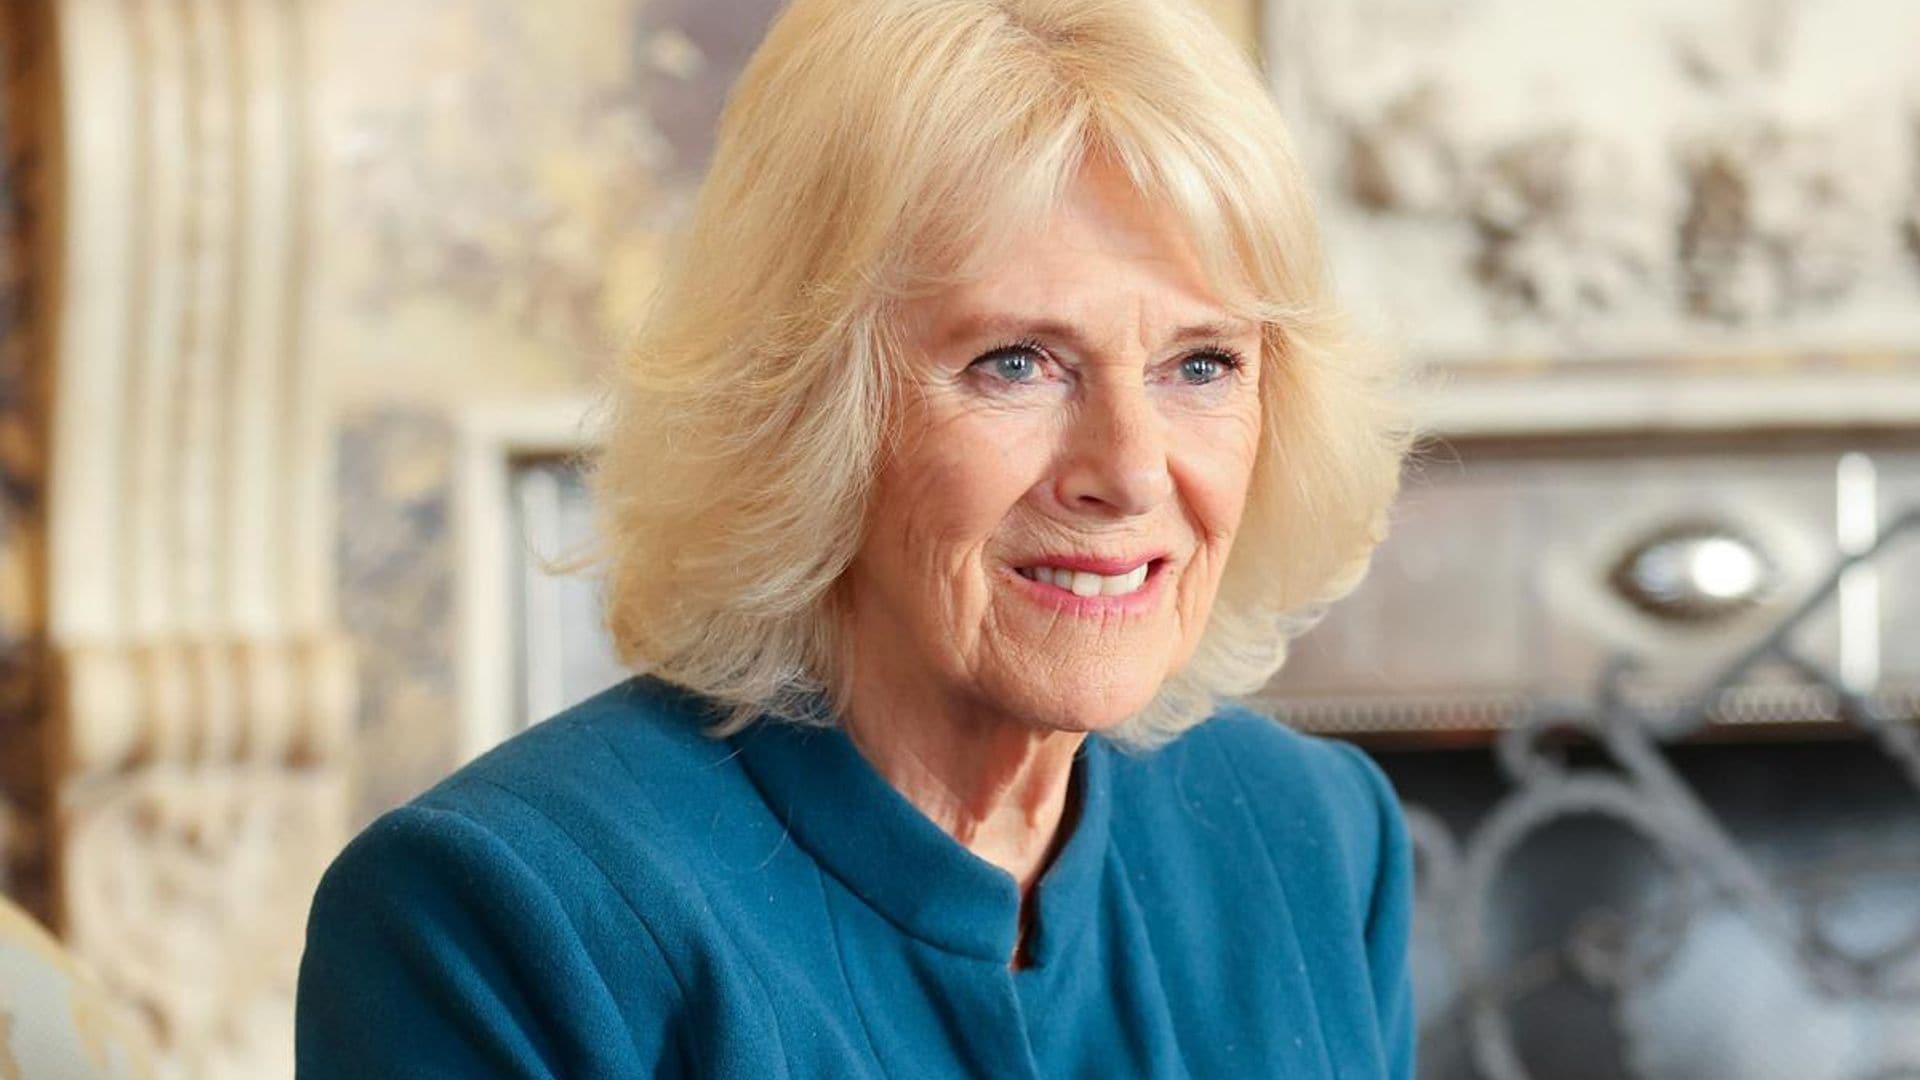 The Duchess of Cornwall meets her 'alter ego' from 'The Crown'